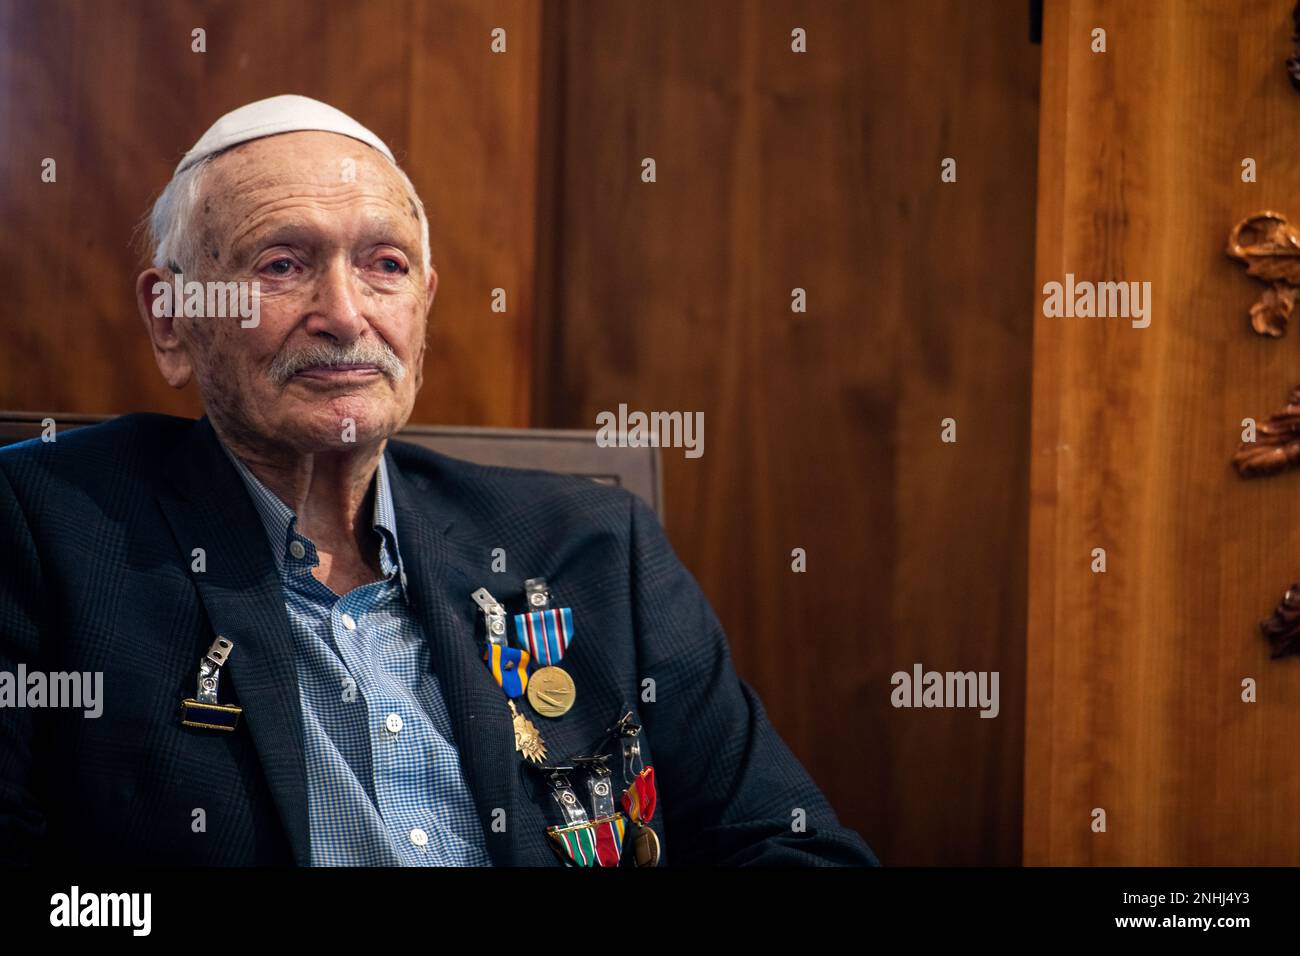 U.S. Army Air Corps 1st Lt. Gerald Teldon, retired, receives his award medals for his honorable service as a pilot on July 29, 2022, at the Chabad Center for Jewish Life and Learning, San Antonio, Texas. Teldon, born in the Bronx, N.Y., in 1924, joined the military in 1944. He completed 62 missions during WWII and the Korean War. Lt. Col. Andrew Stein, 502nd Operations Support Squadron commander, was the presiding officer. The awards presented to Teldon are as follows: the Air Medal; American Campaign Medal; European – African – Middle Eastern Campaign Medal; World War II Victory Medal; Nation Stock Photo